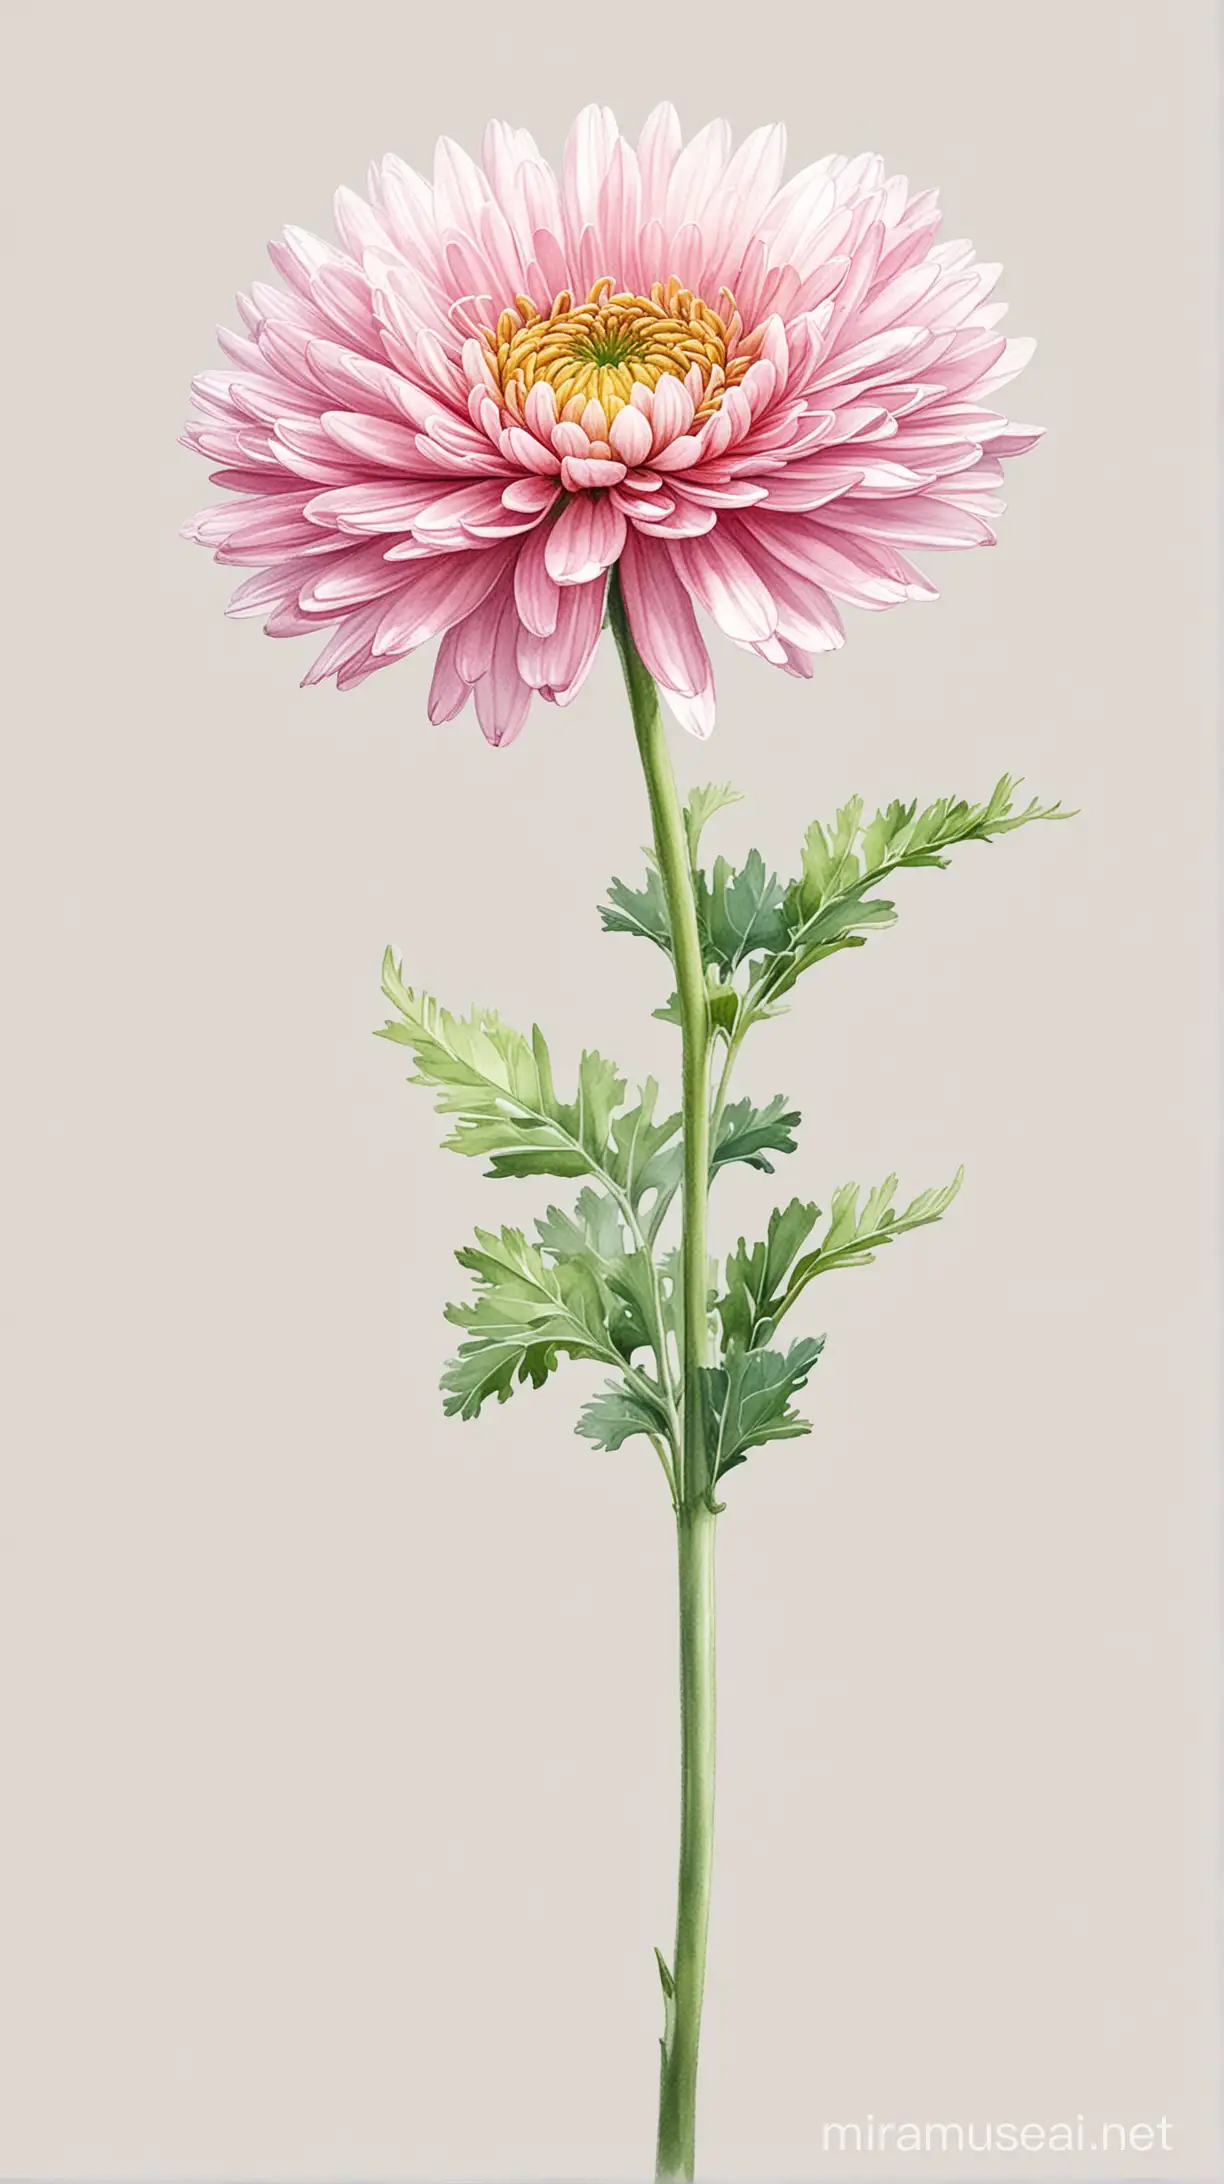 pink single Chrysanthemum flower with long stem in white background in watercolor pseudo style, leaning to the left, vibrant 